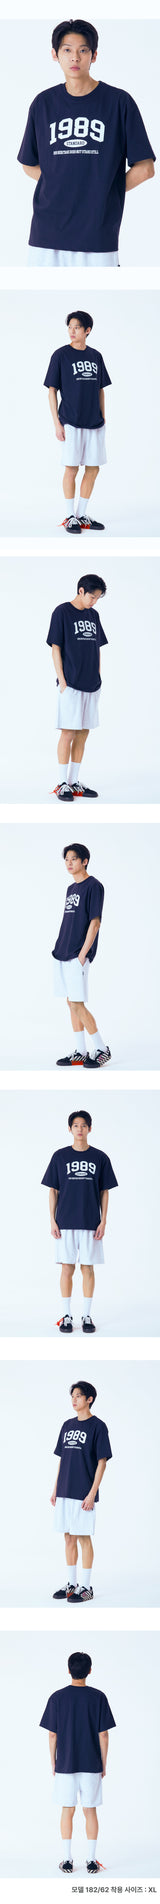 OUR 1989 Cool Cotton Overfit Short Sleeves (SISSTD-0004)